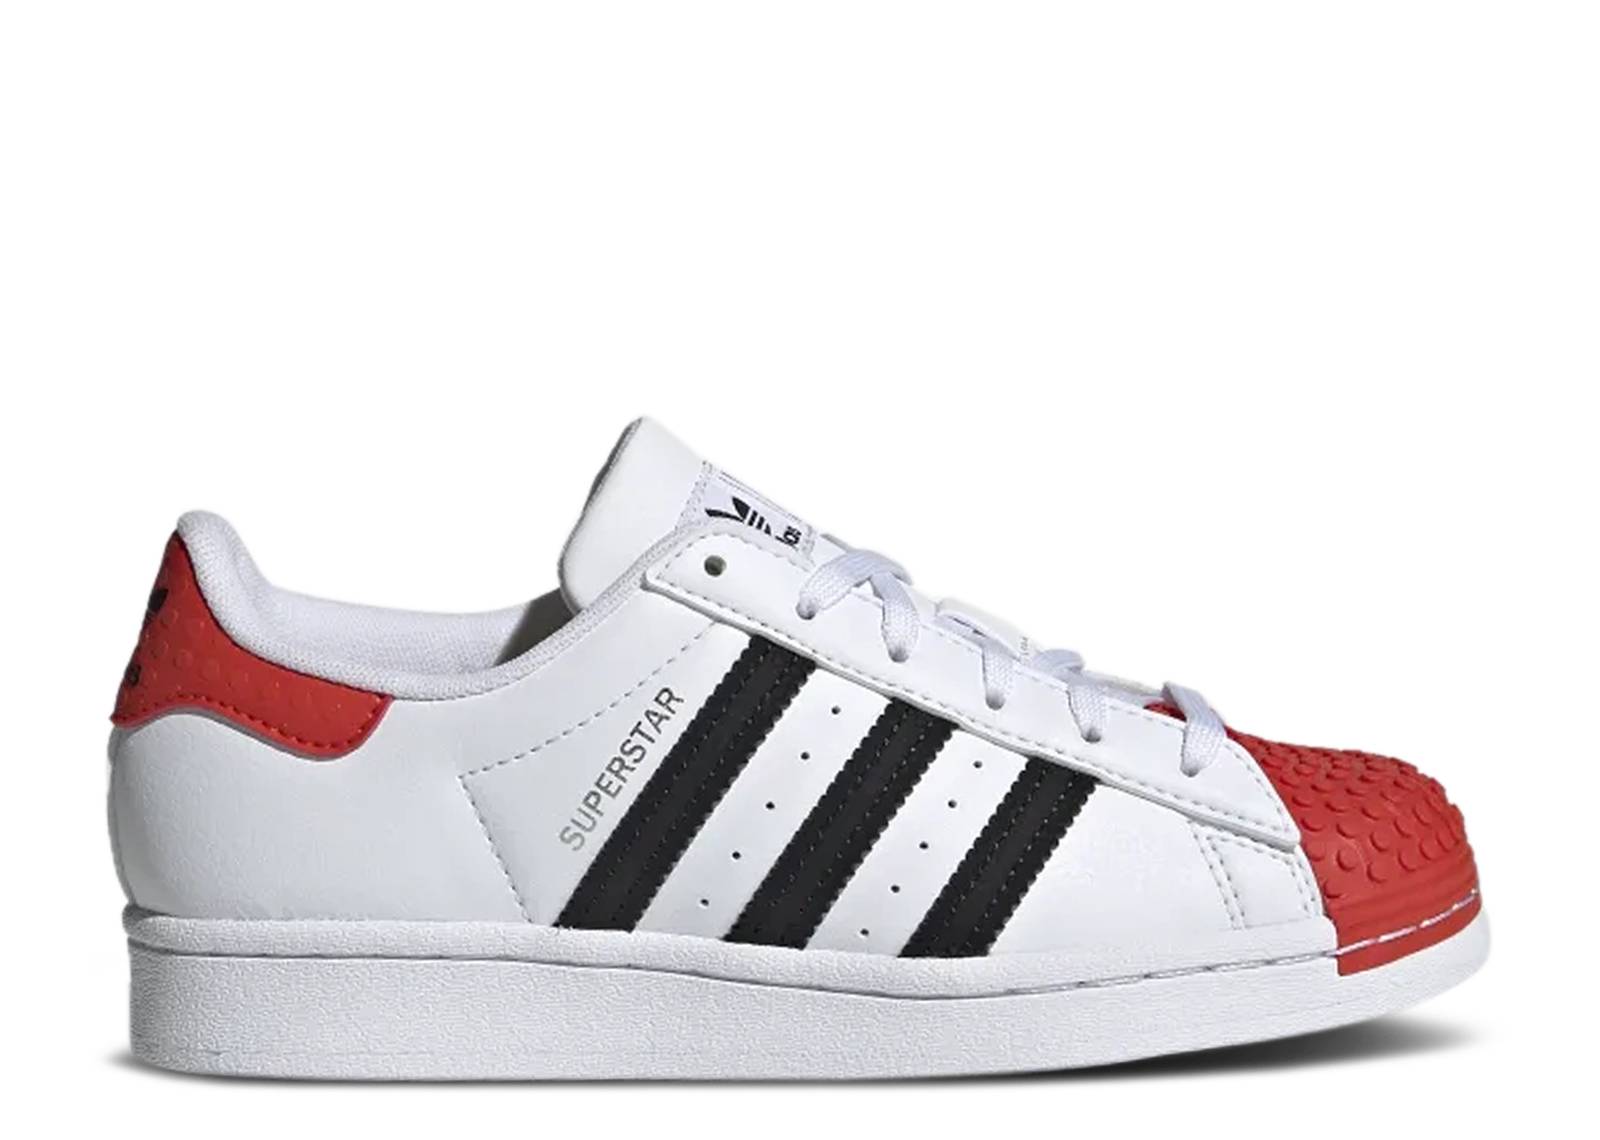 LEGO x Superstar J 'Cloud White Red'